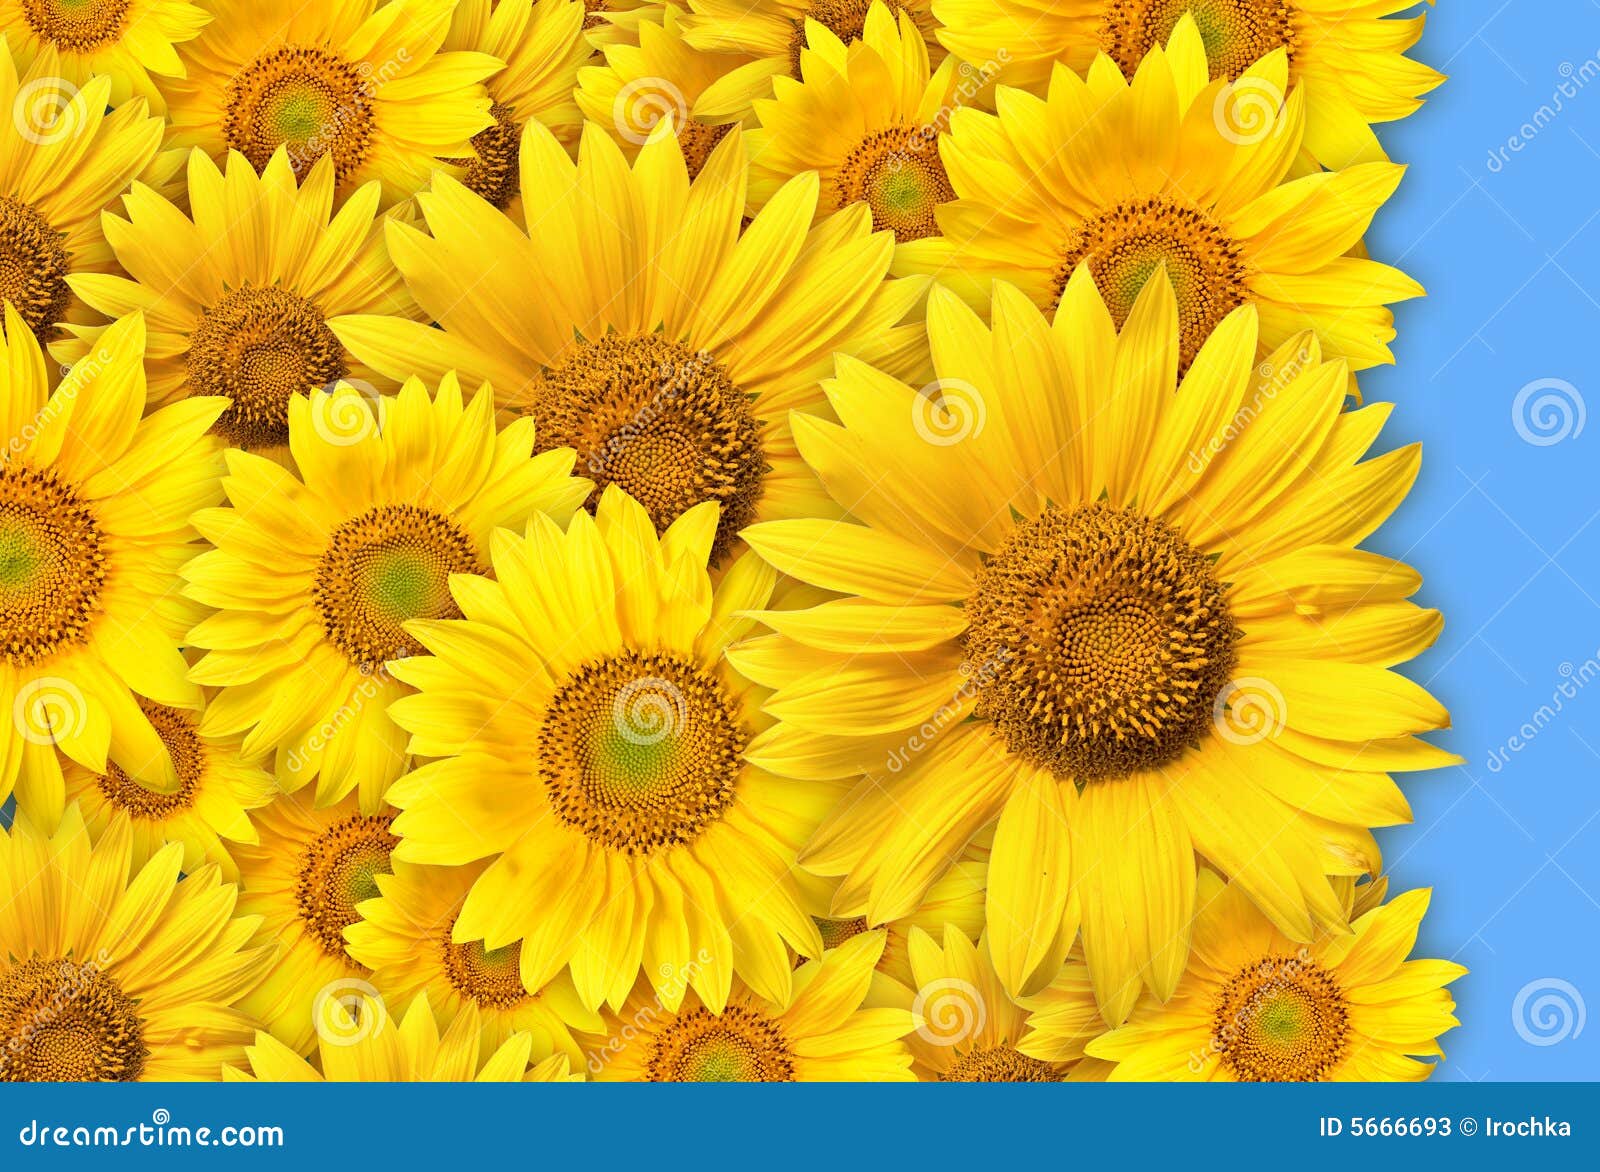 Tipi Di Fiori Gialli.Bunch Of Yellow Flowers Stock Image Image Of Background 5666693